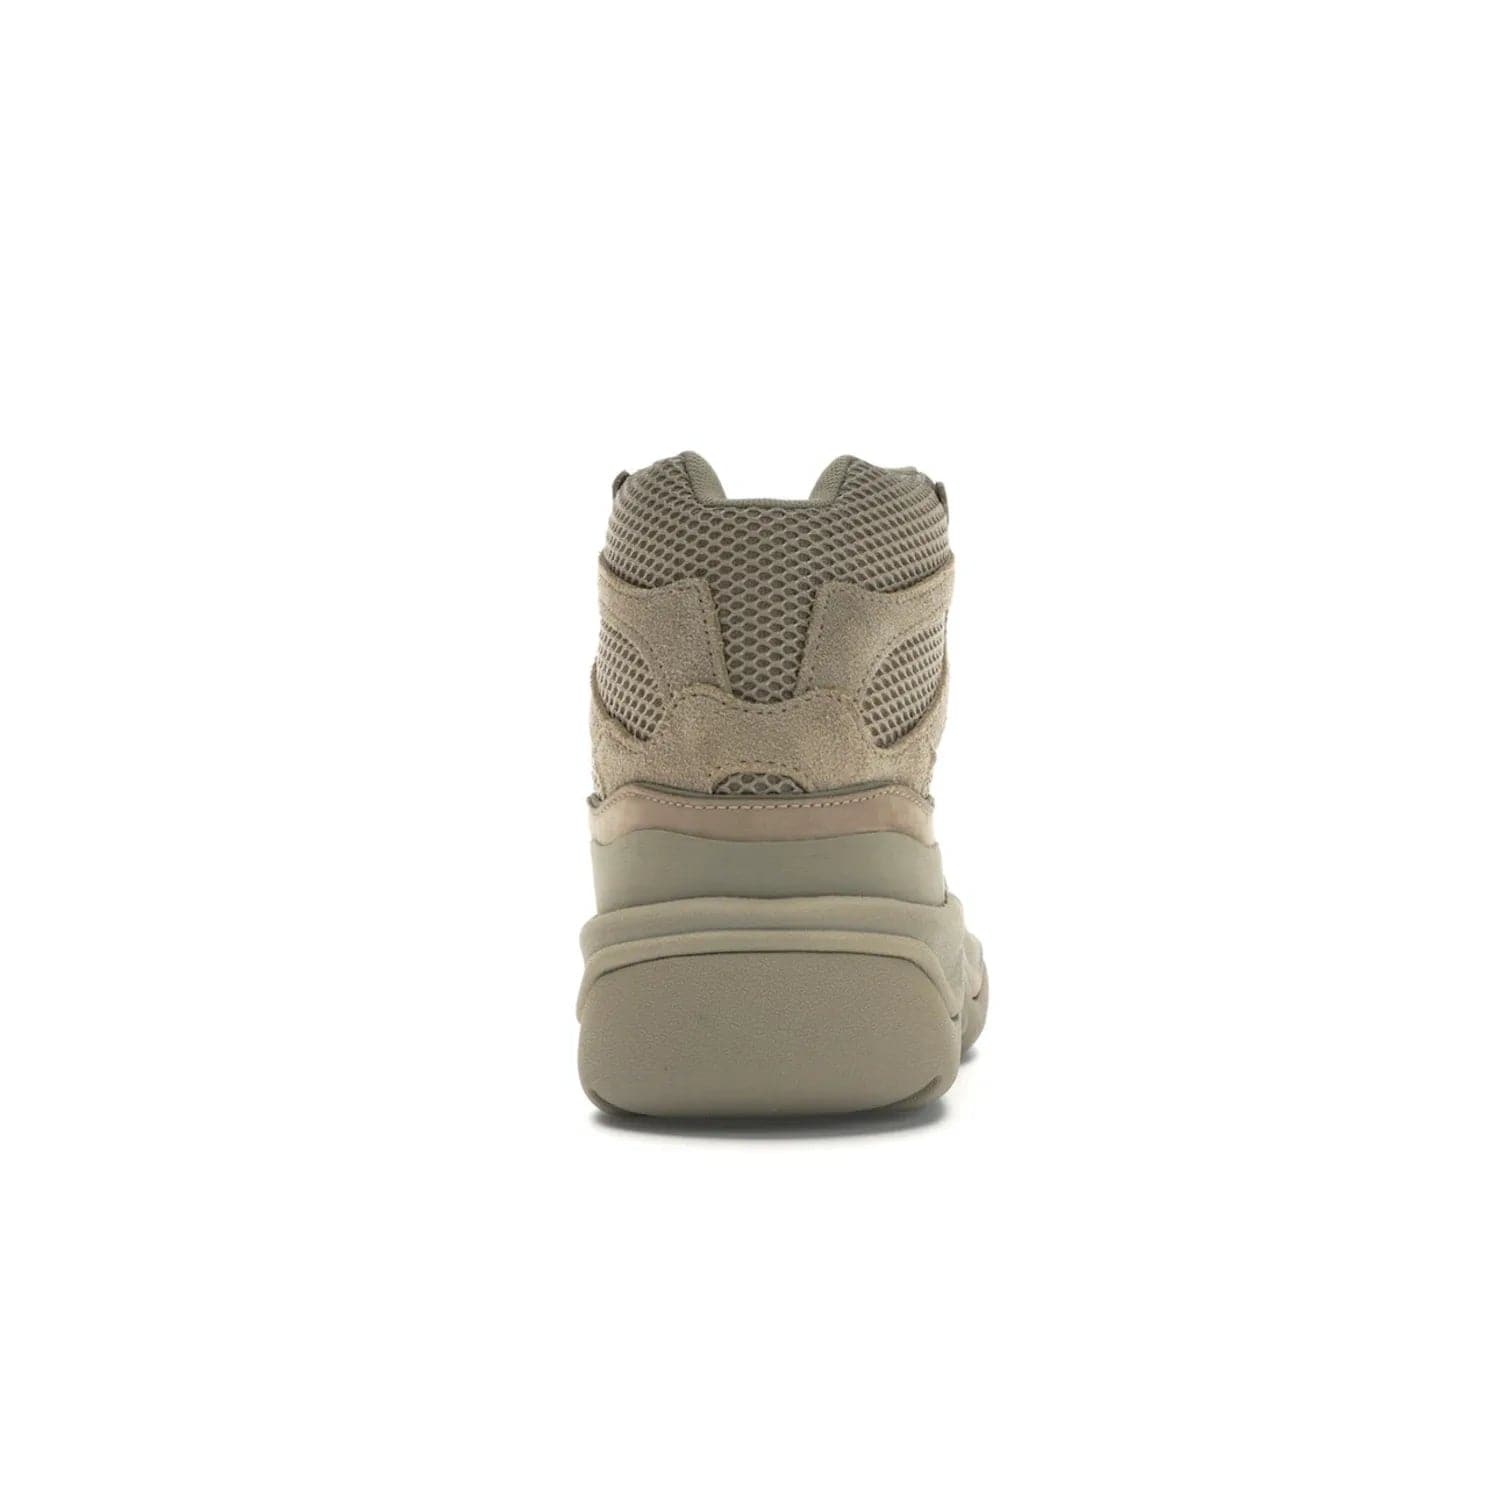 adidas Yeezy Desert Boot Rock - Image 28 - Only at www.BallersClubKickz.com - #
This season, make a fashion statement with the adidas Yeezy Desert Boot Rock. Nubuck and suede upper offers tonal style while the grooved sole provides traction and stability. Get yours in April 2019.